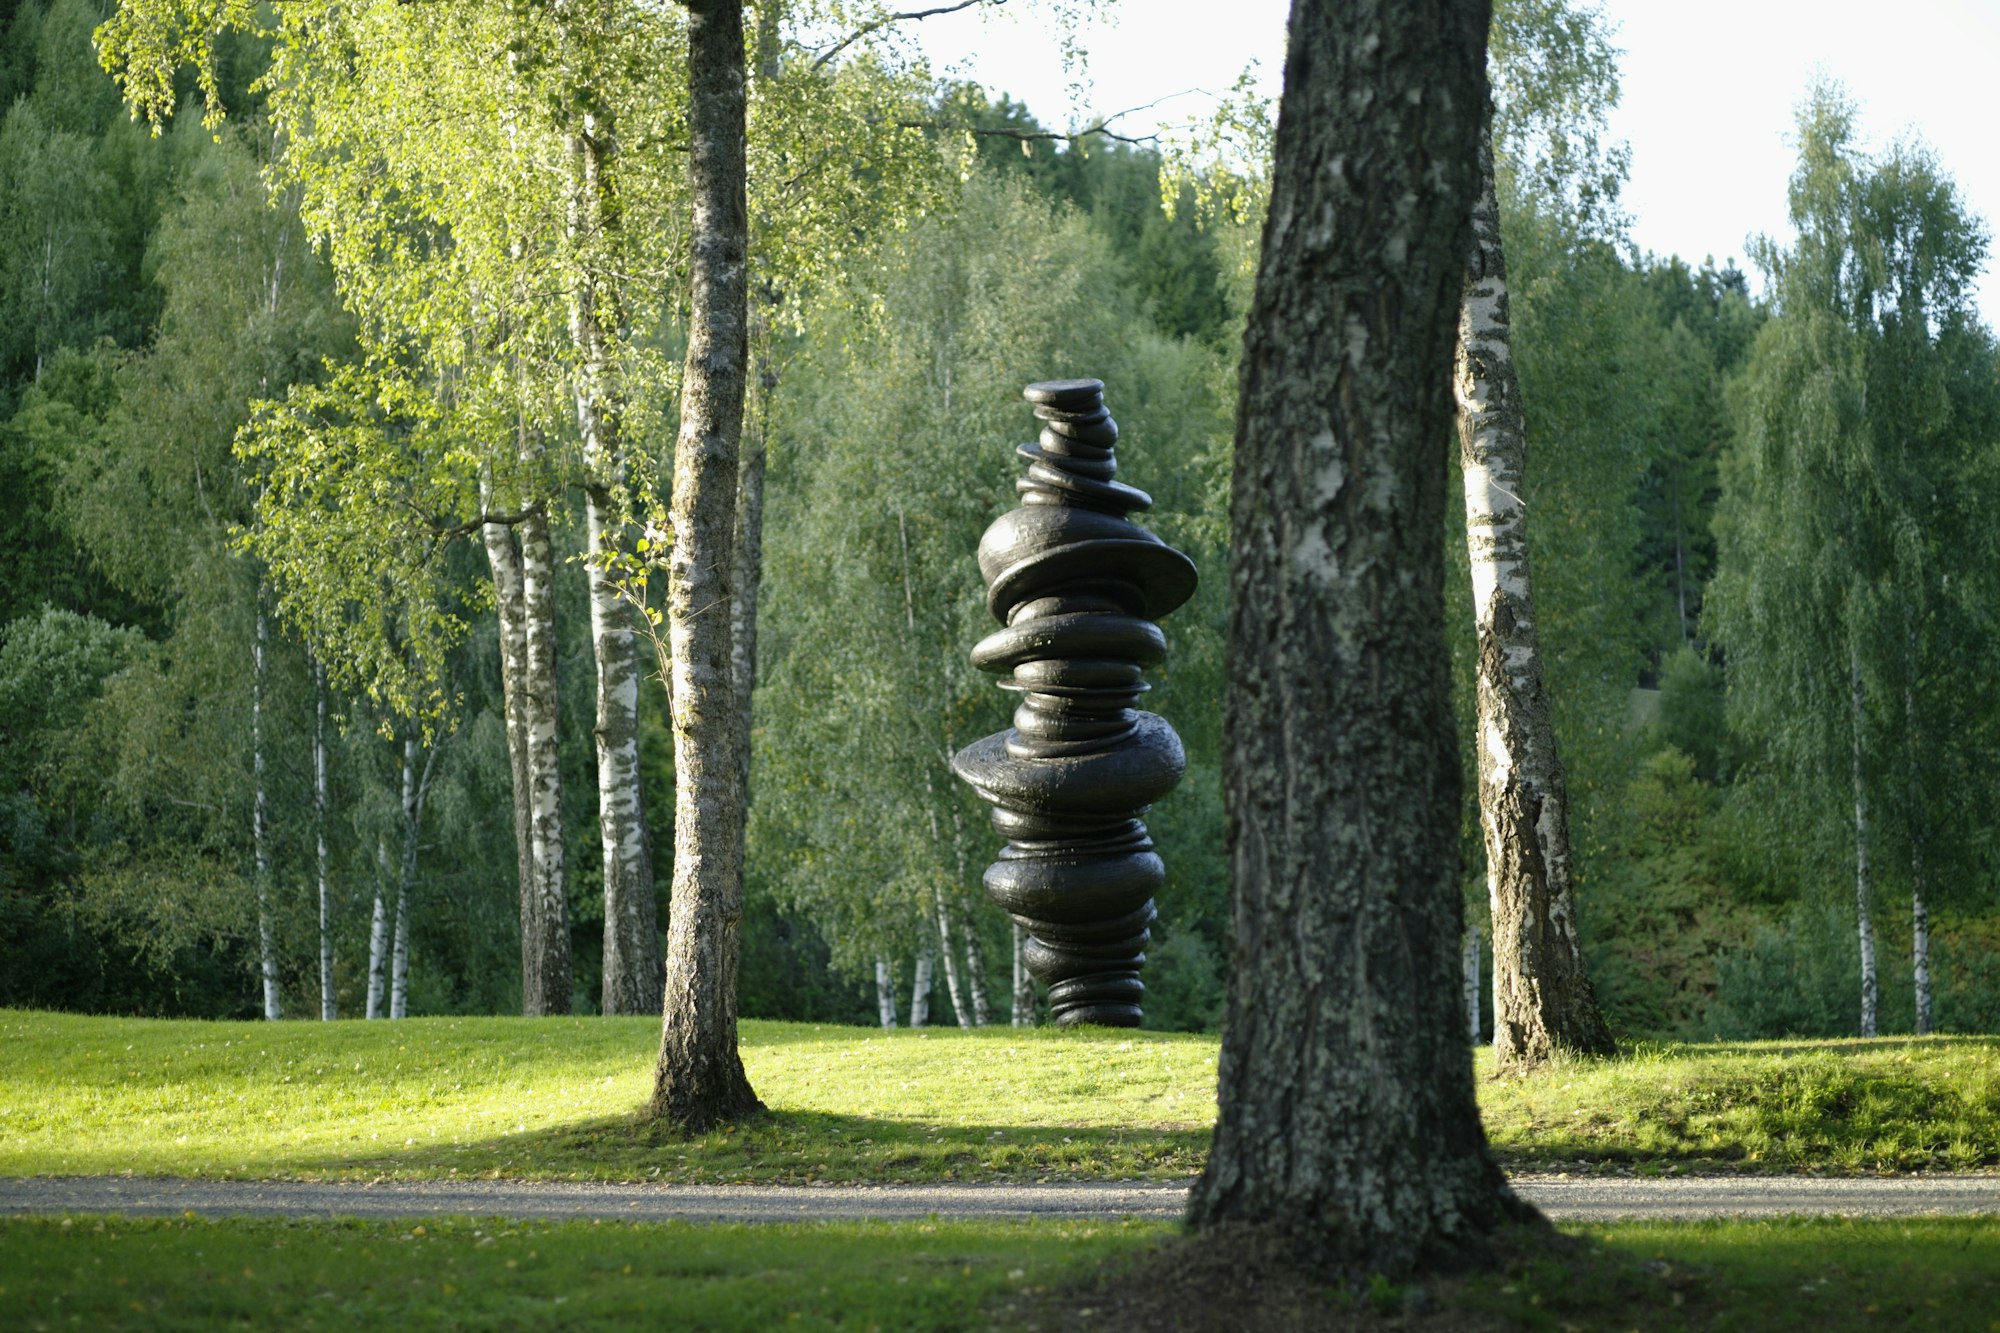 Sculpture, black, stones placed on top of each other. Nature, green.